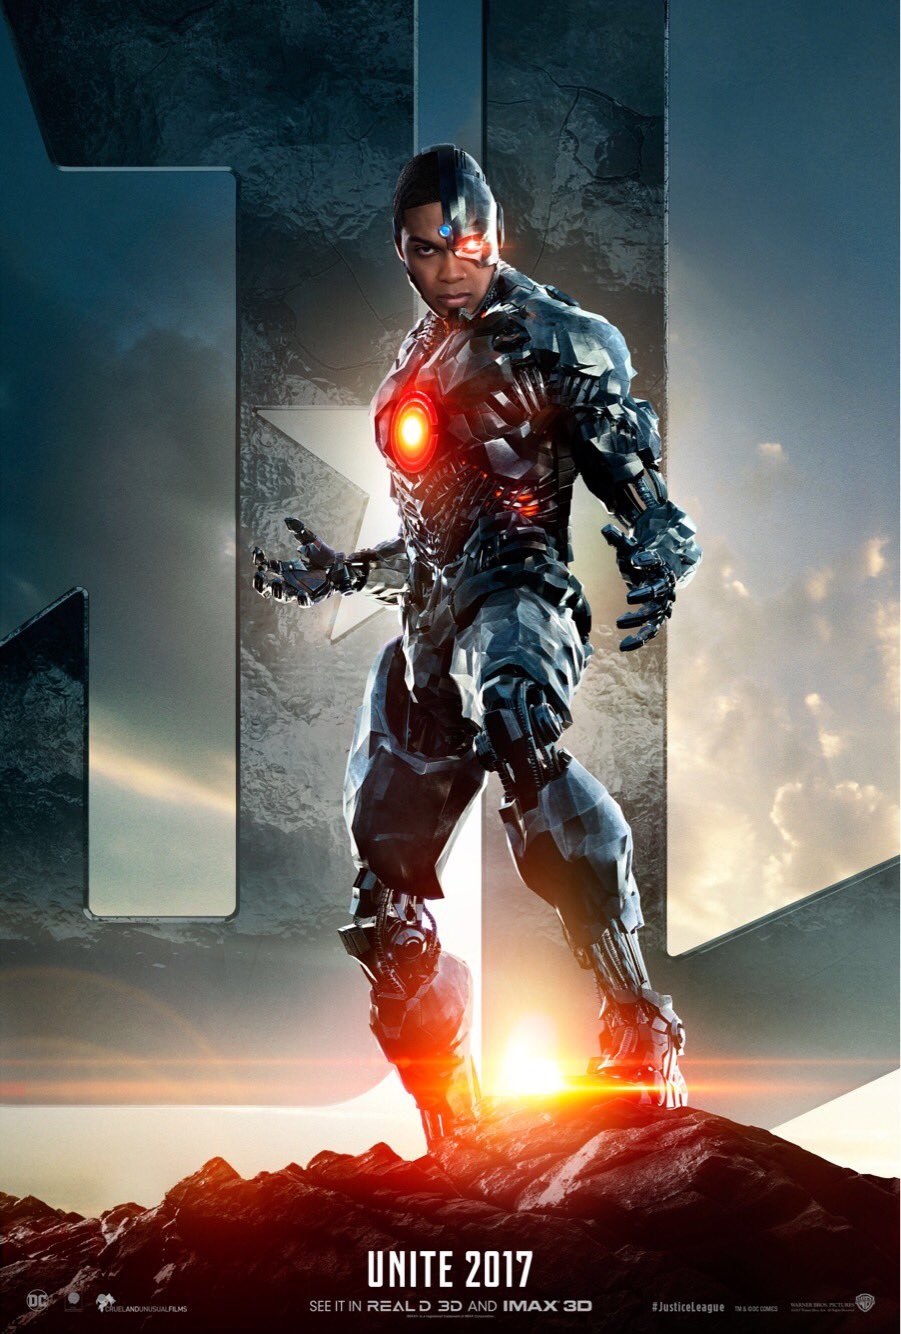 Cyborg-Poster-Justice-League.jpg